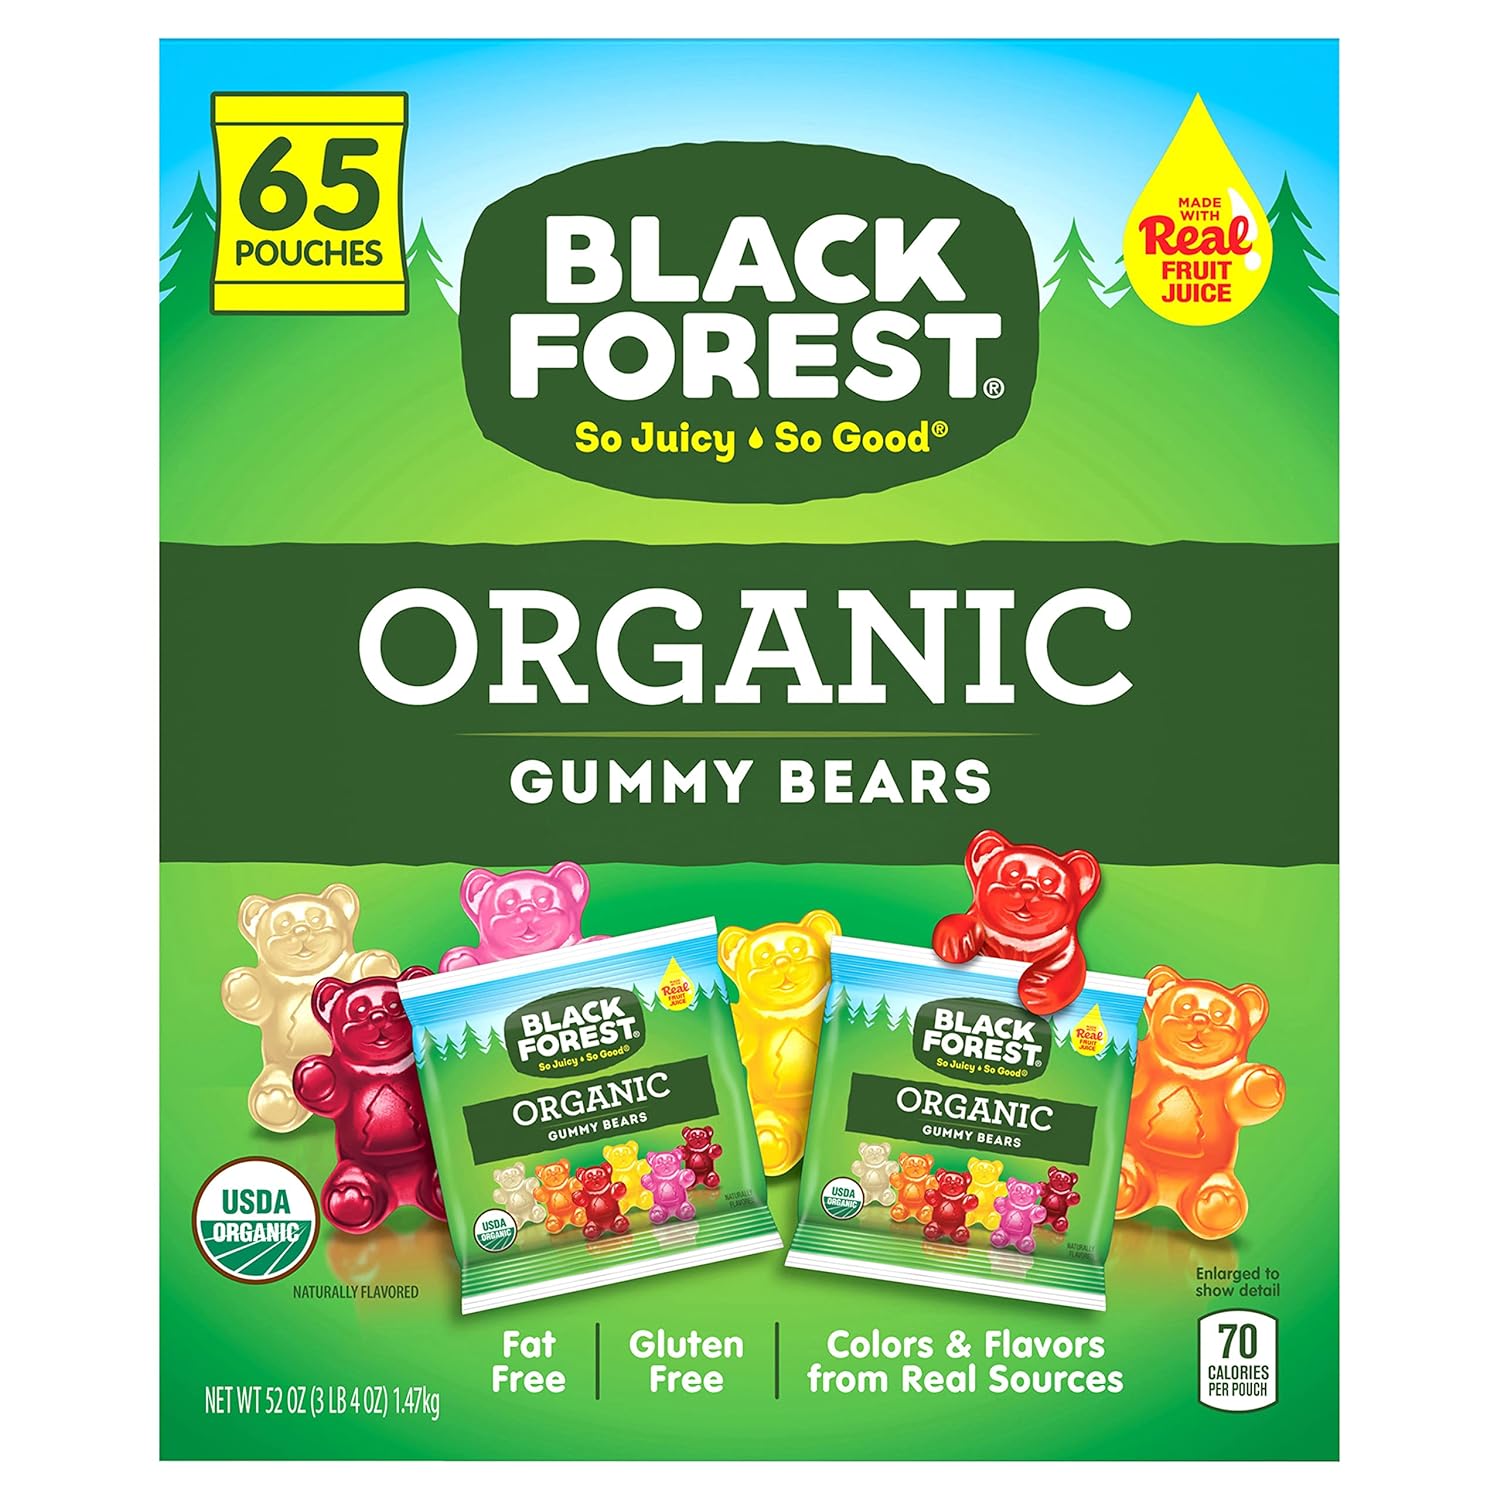 Black Forest Organic Gummy Bears Candy, 0.8 Ounce Pouches, 65 Count